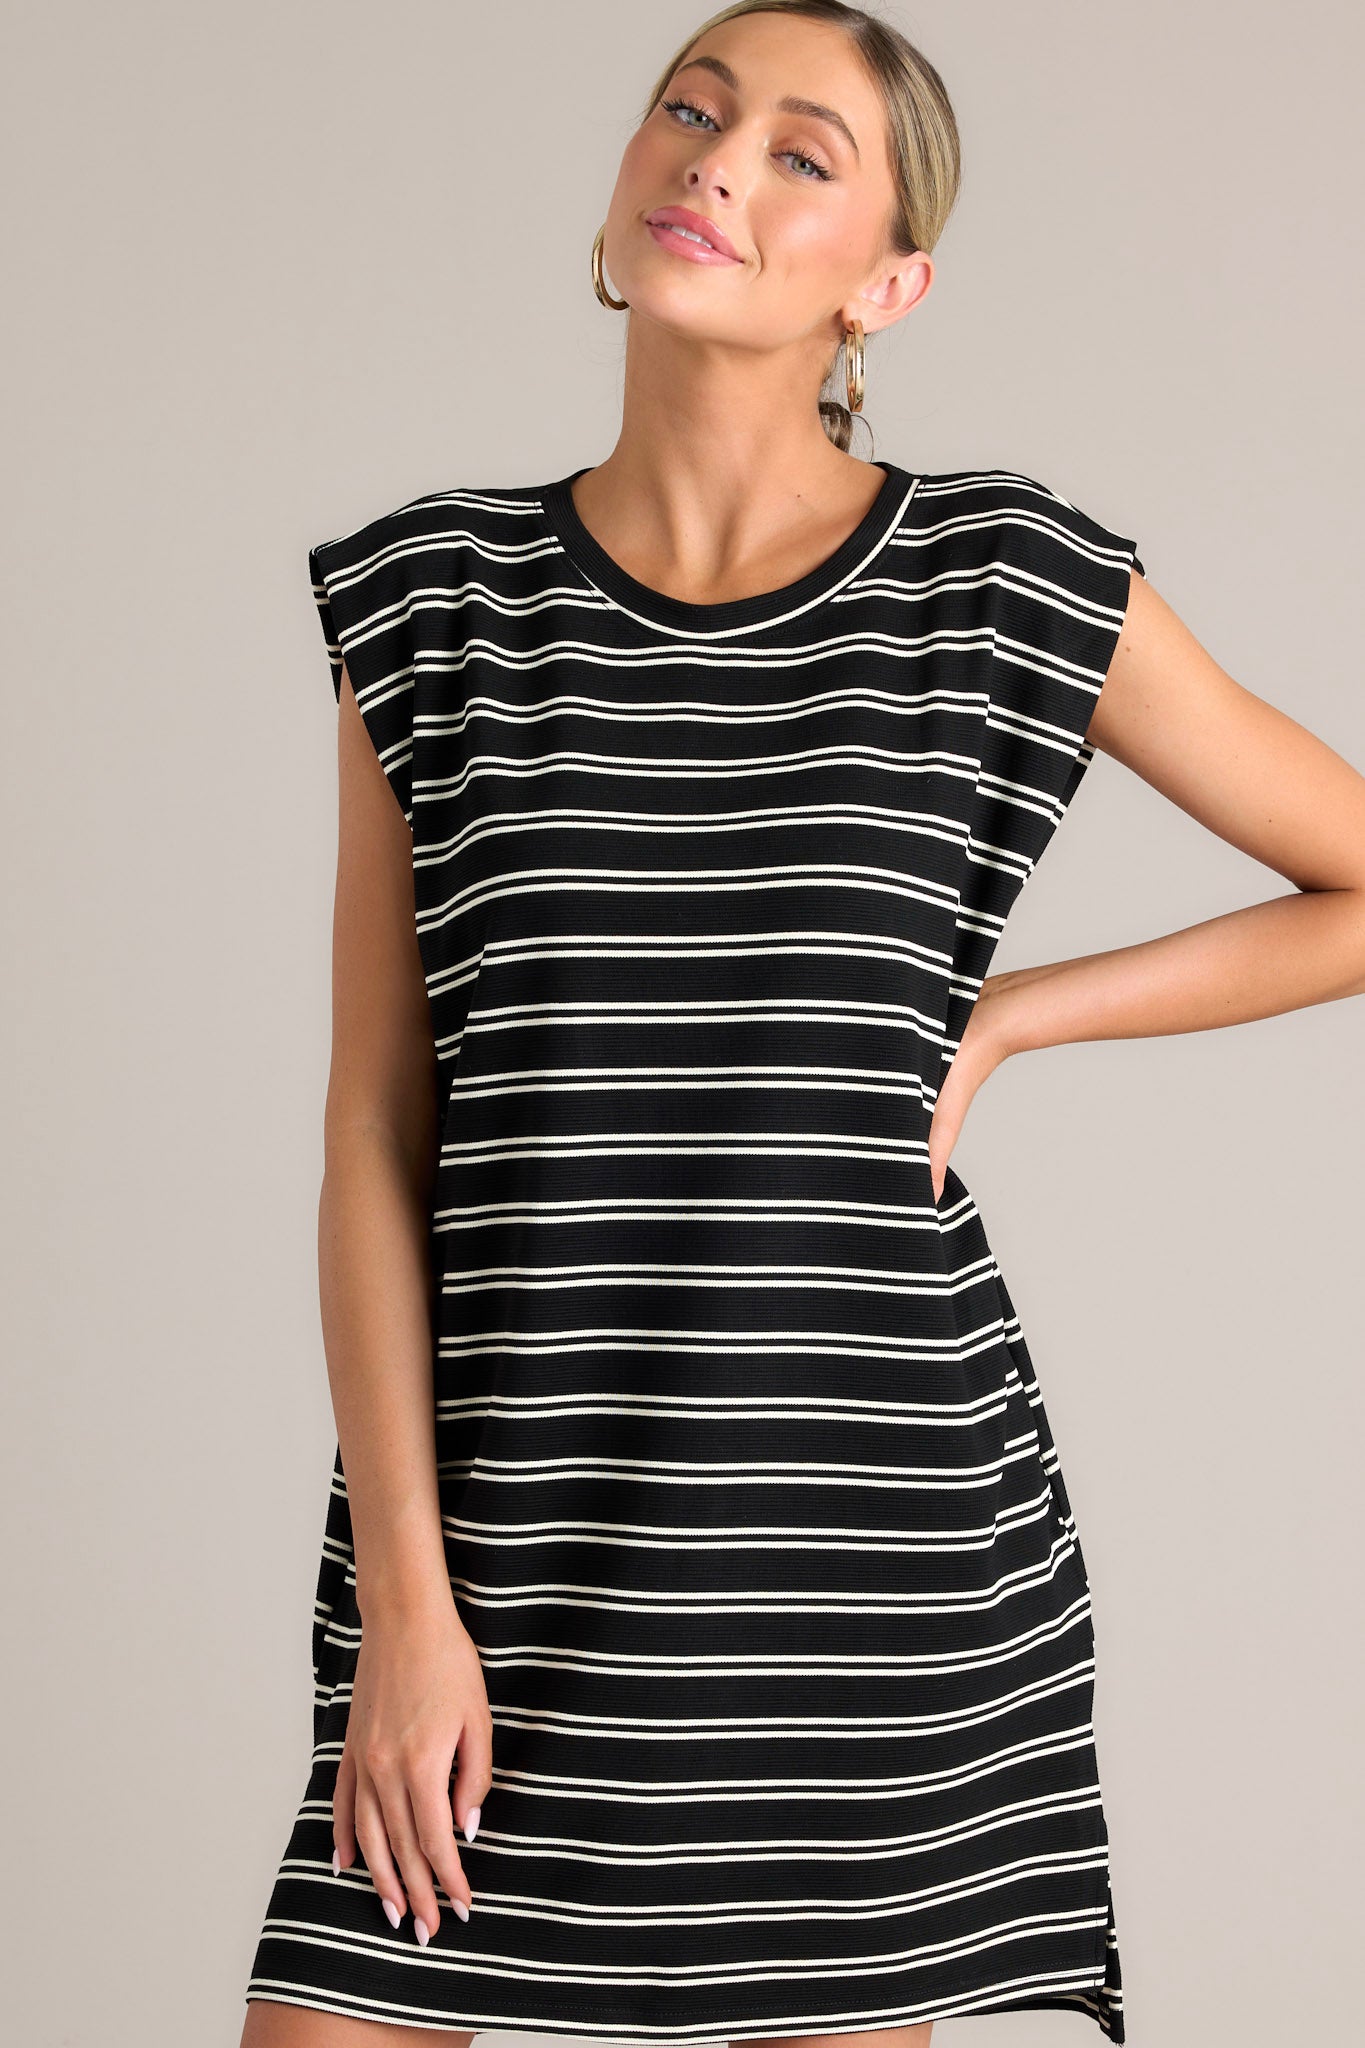 This black stripe mini dress features a crew neckline, short cap sleeves, a double stripe pattern, functional hip pockets, and a split hemline.